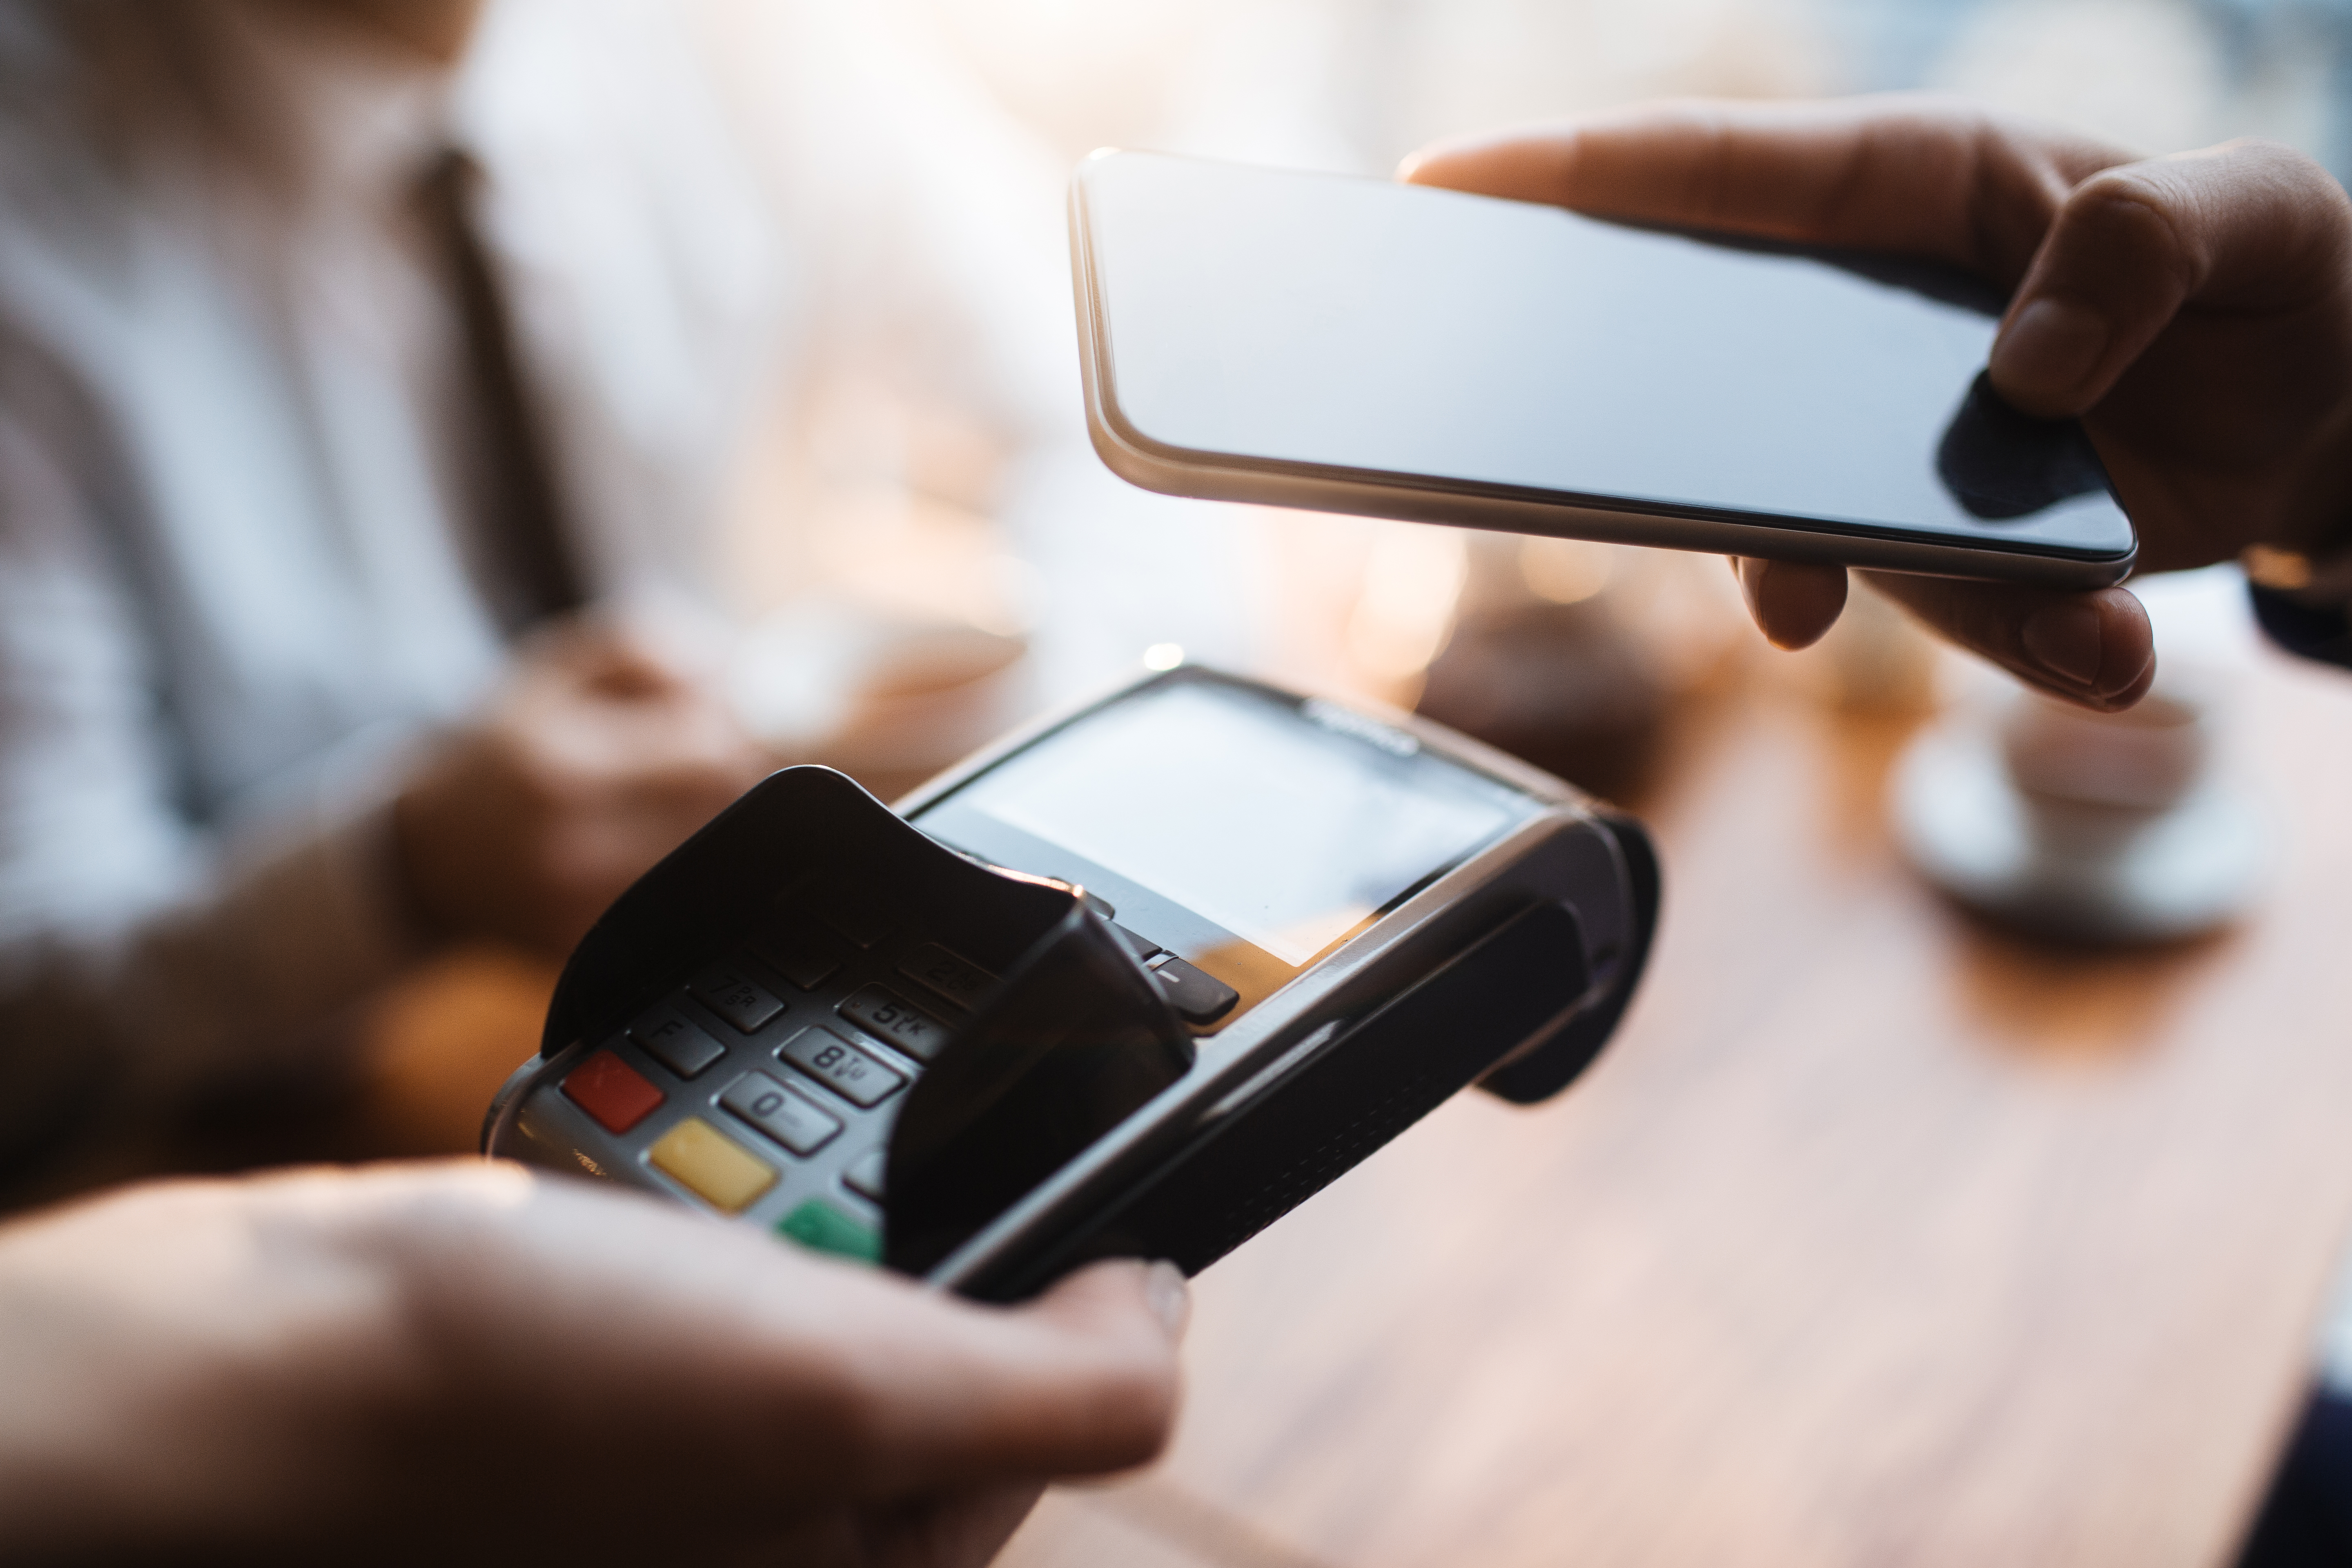 TrendSource Market Research: COVID-19 is Accelerating Mobile Payment Adoption